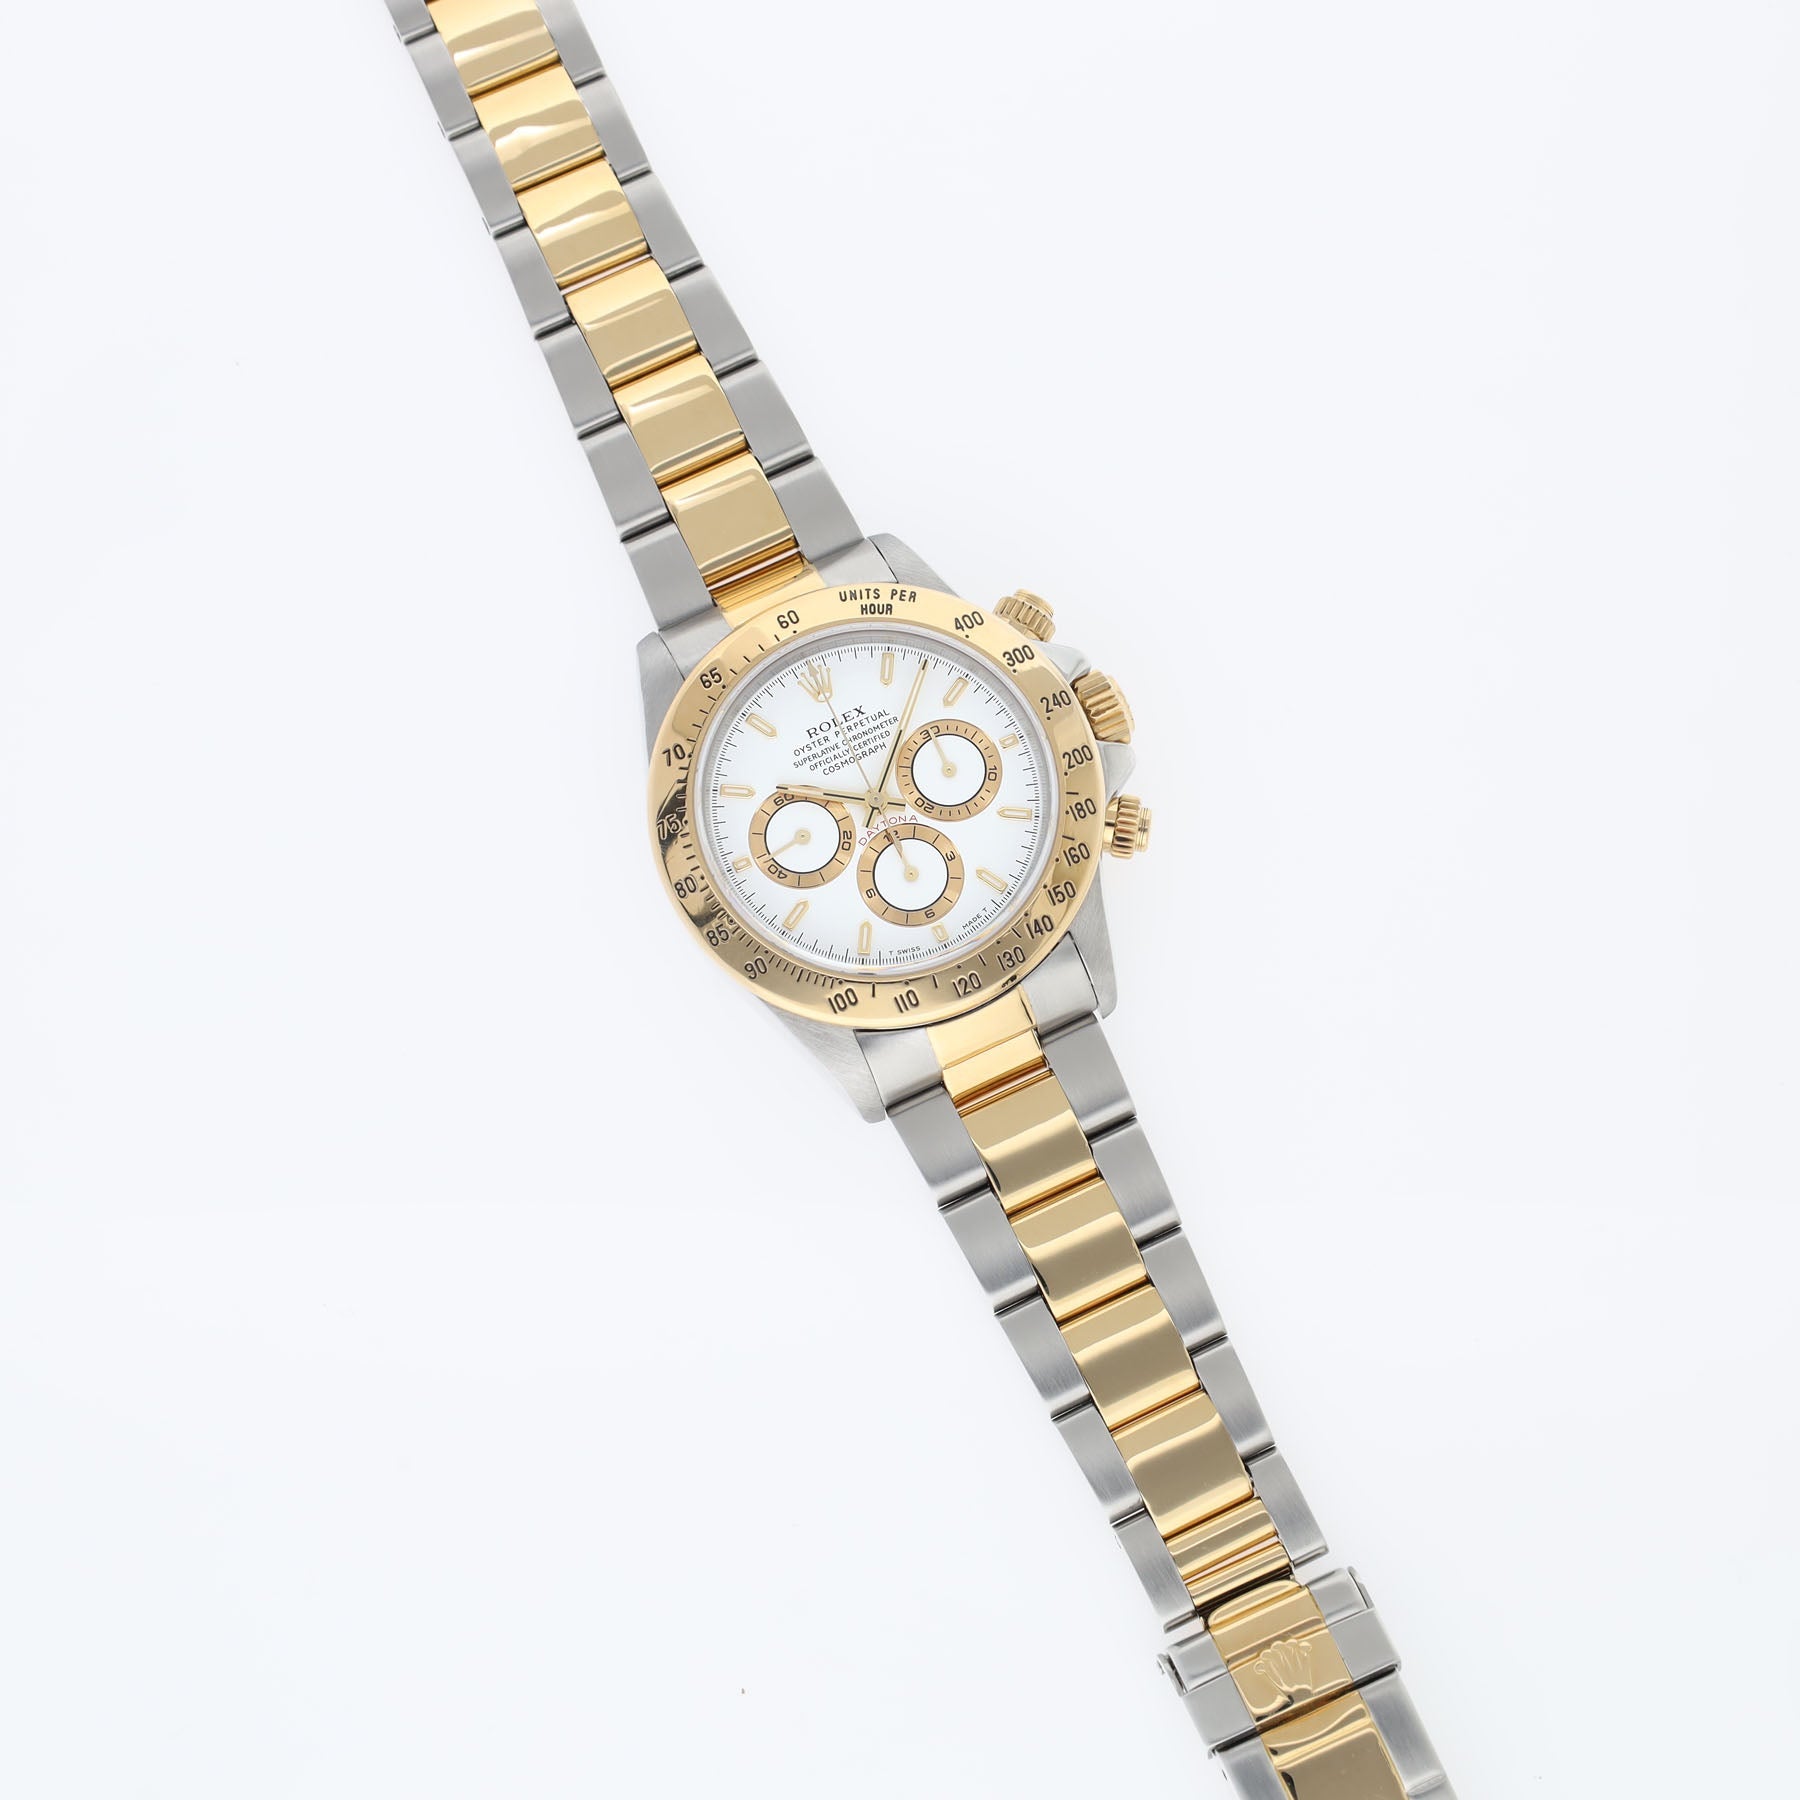 Rolex Cosmograph Daytona 16523 Steel and Gold White Dial